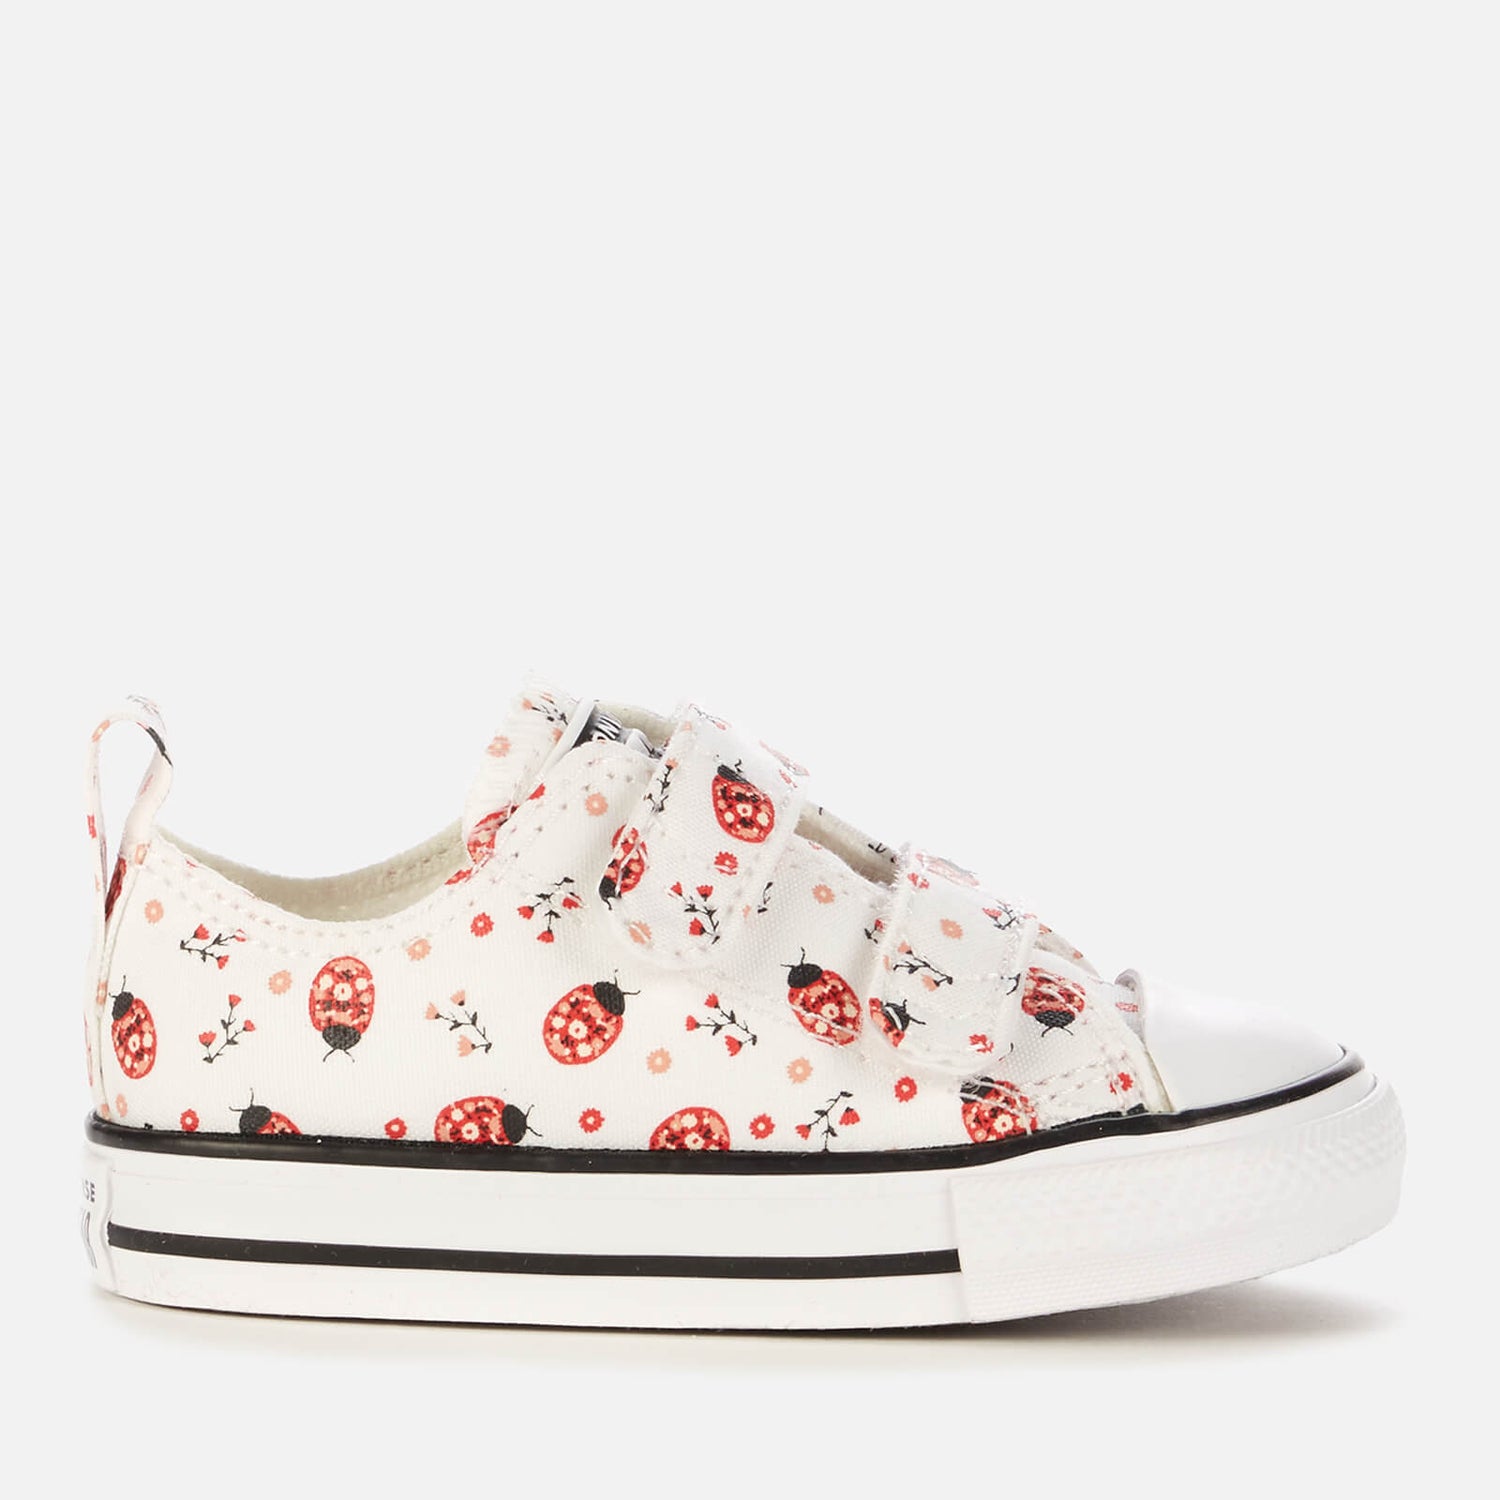 Converse Toddlers' Chuck Taylor All Star Ladybird Velcro Ox Trainers - White/Red/Black